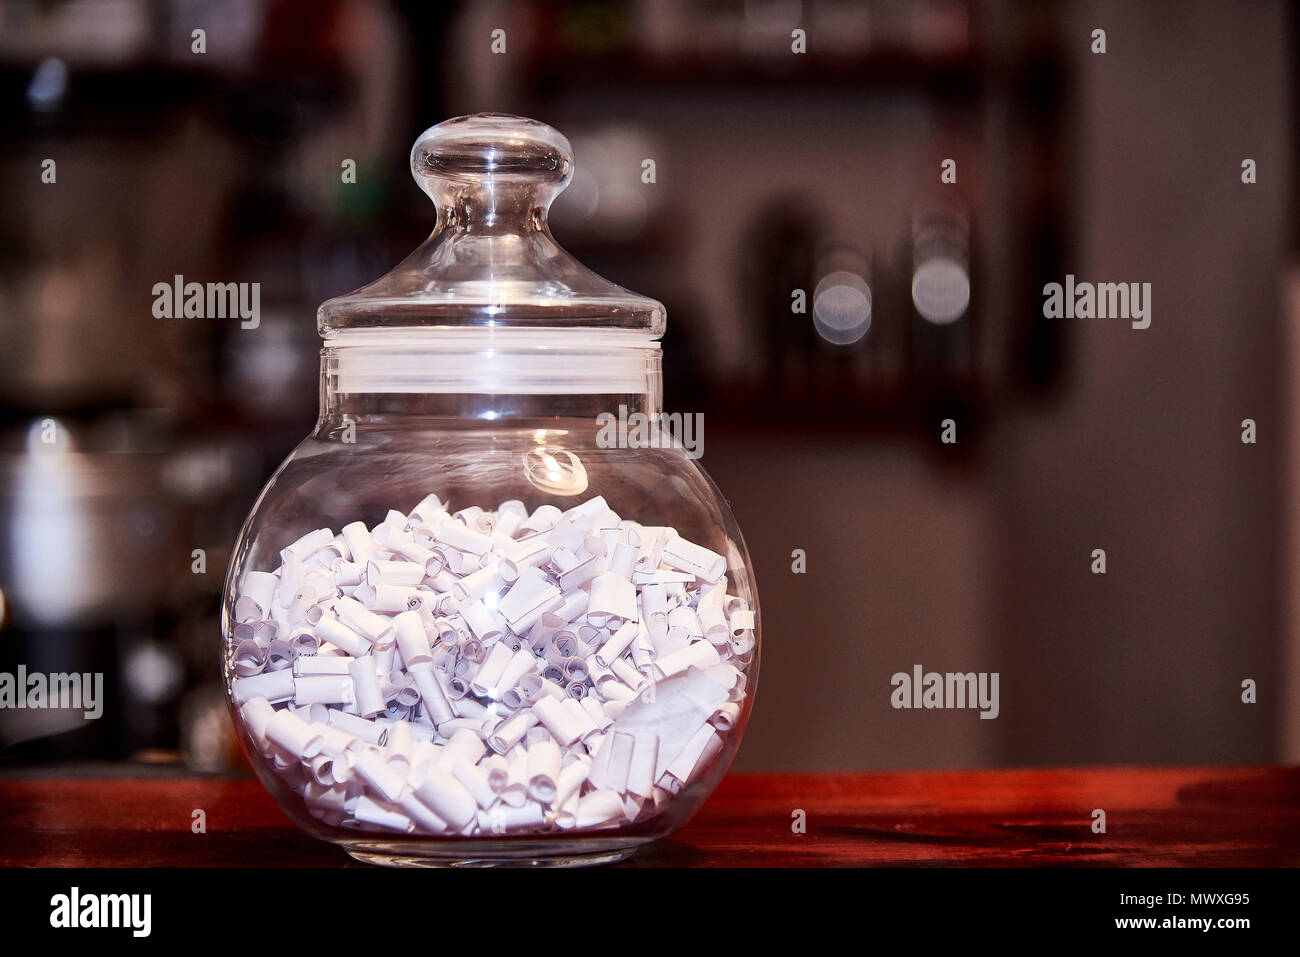 Glass jar with predictions stands on a wooden table Stock Photo